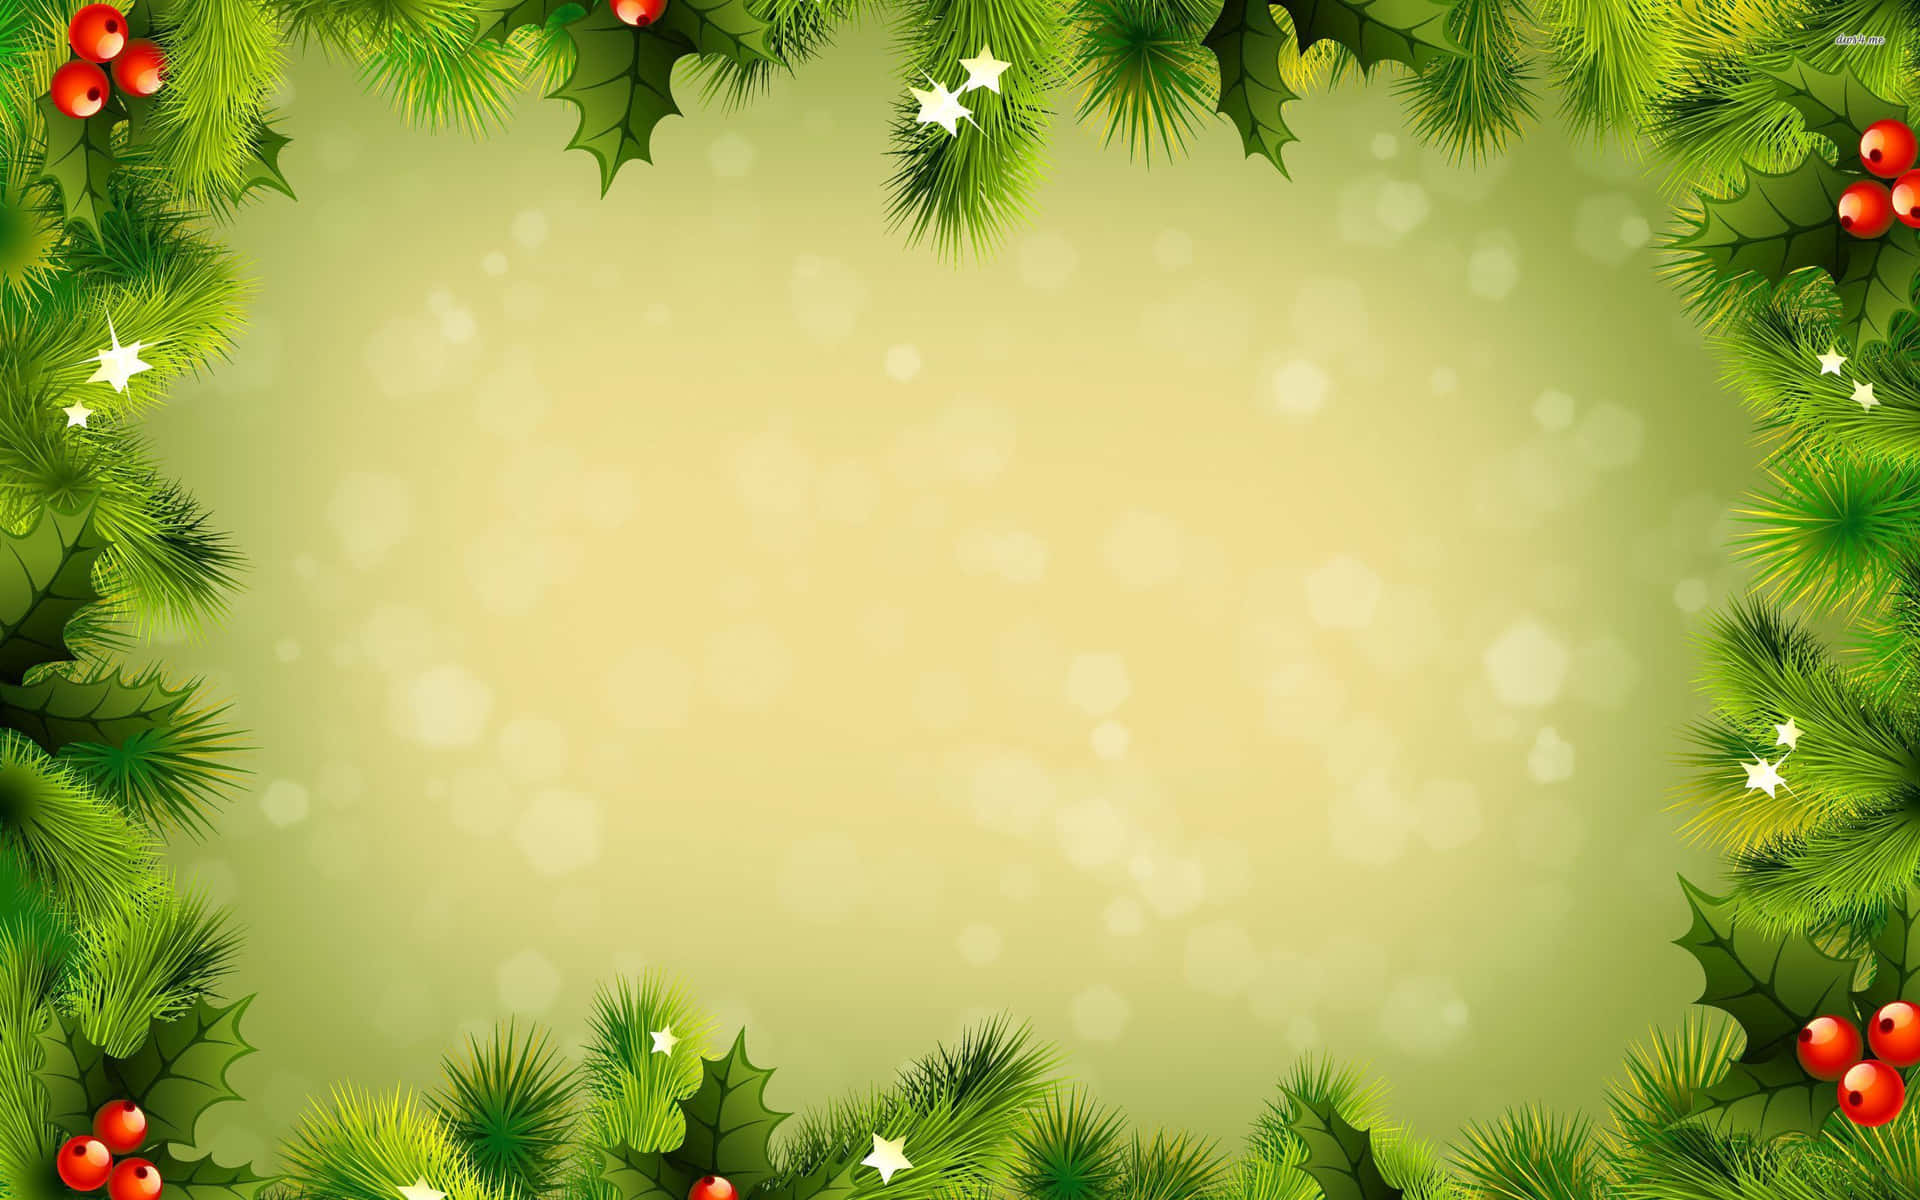 Christmas Background With Holly Leaves And Berries